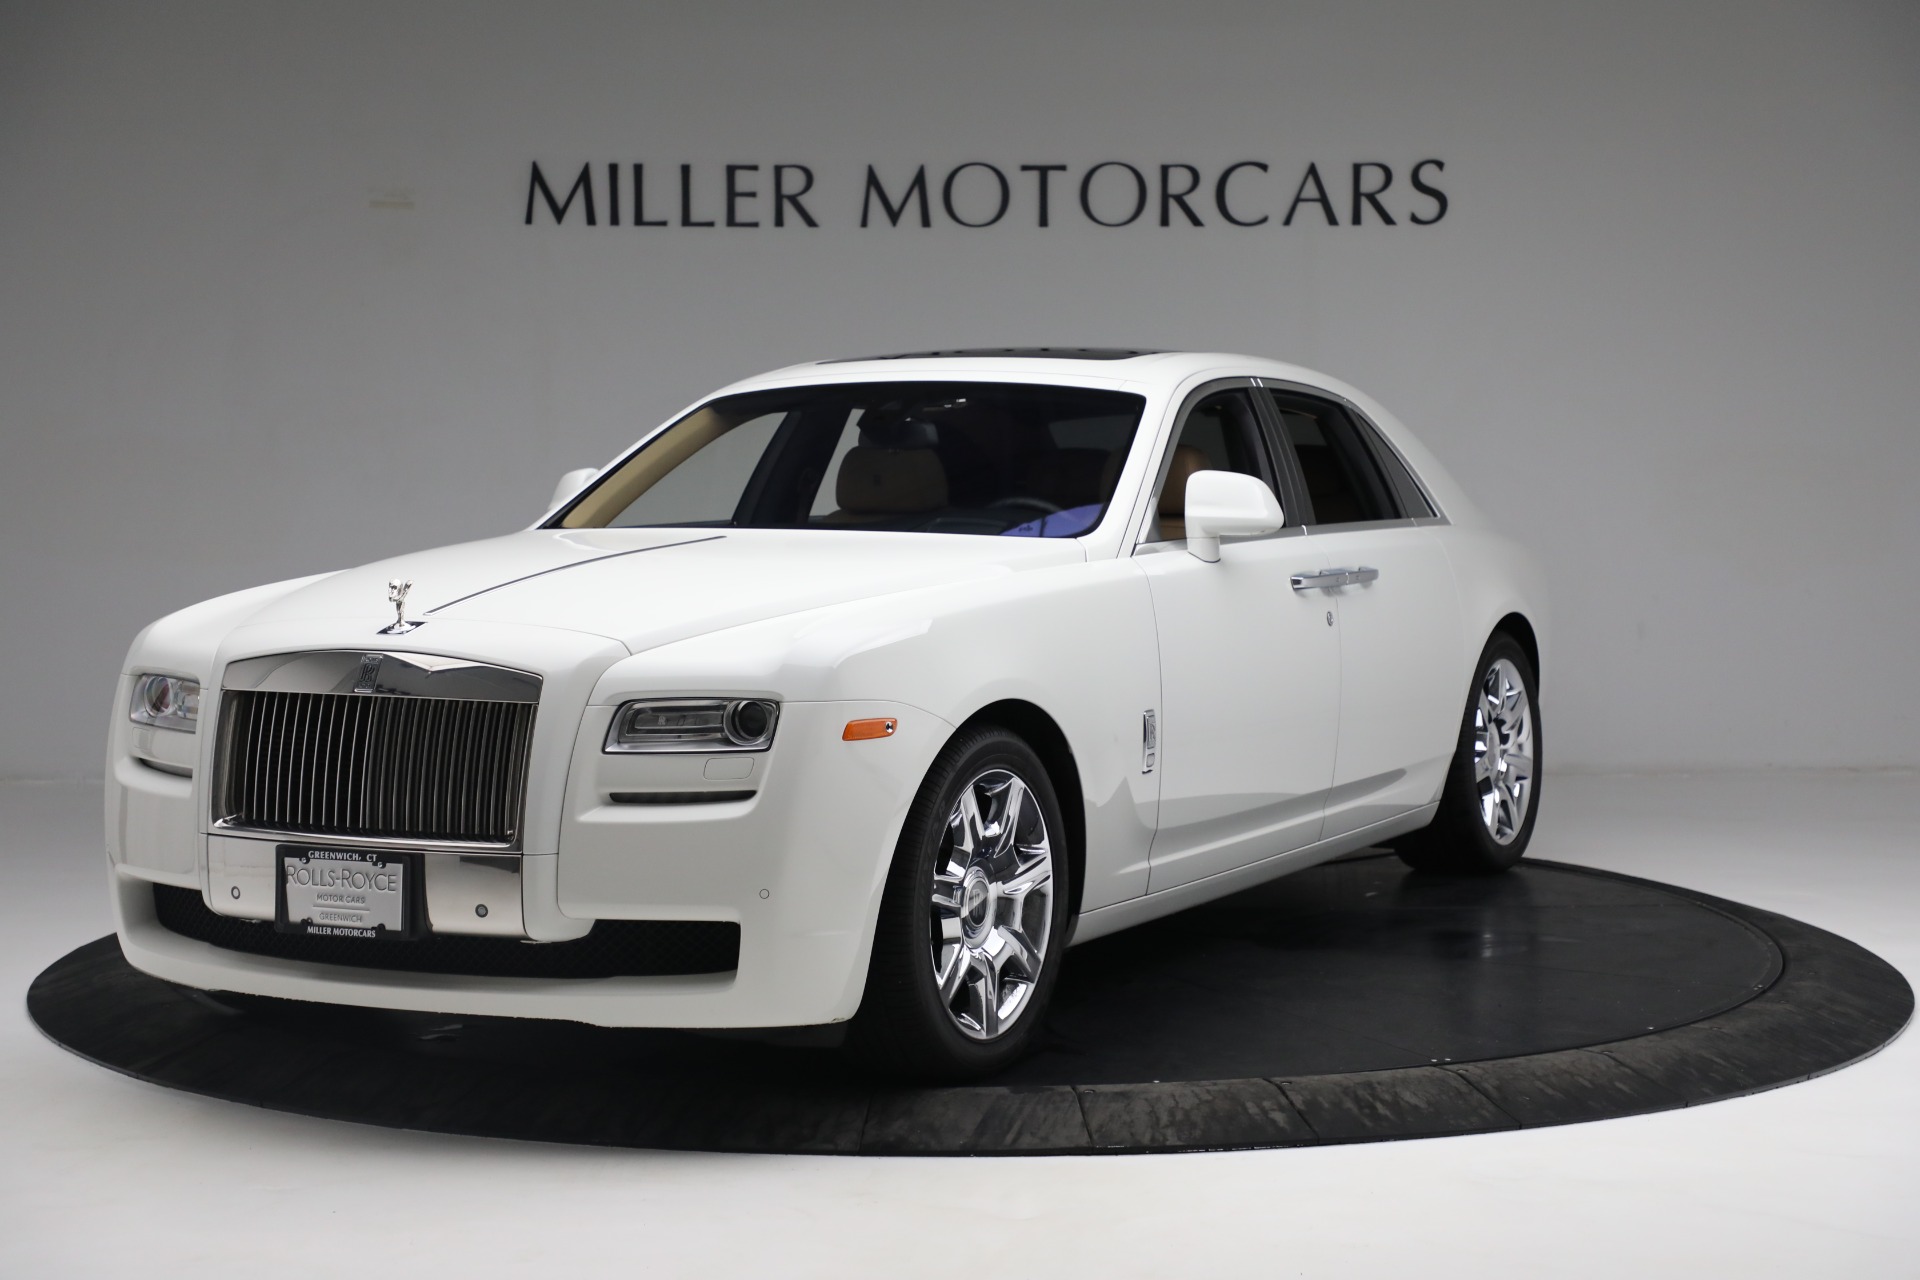 Used 2013 Rolls-Royce Ghost for sale $159,900 at Pagani of Greenwich in Greenwich CT 06830 1